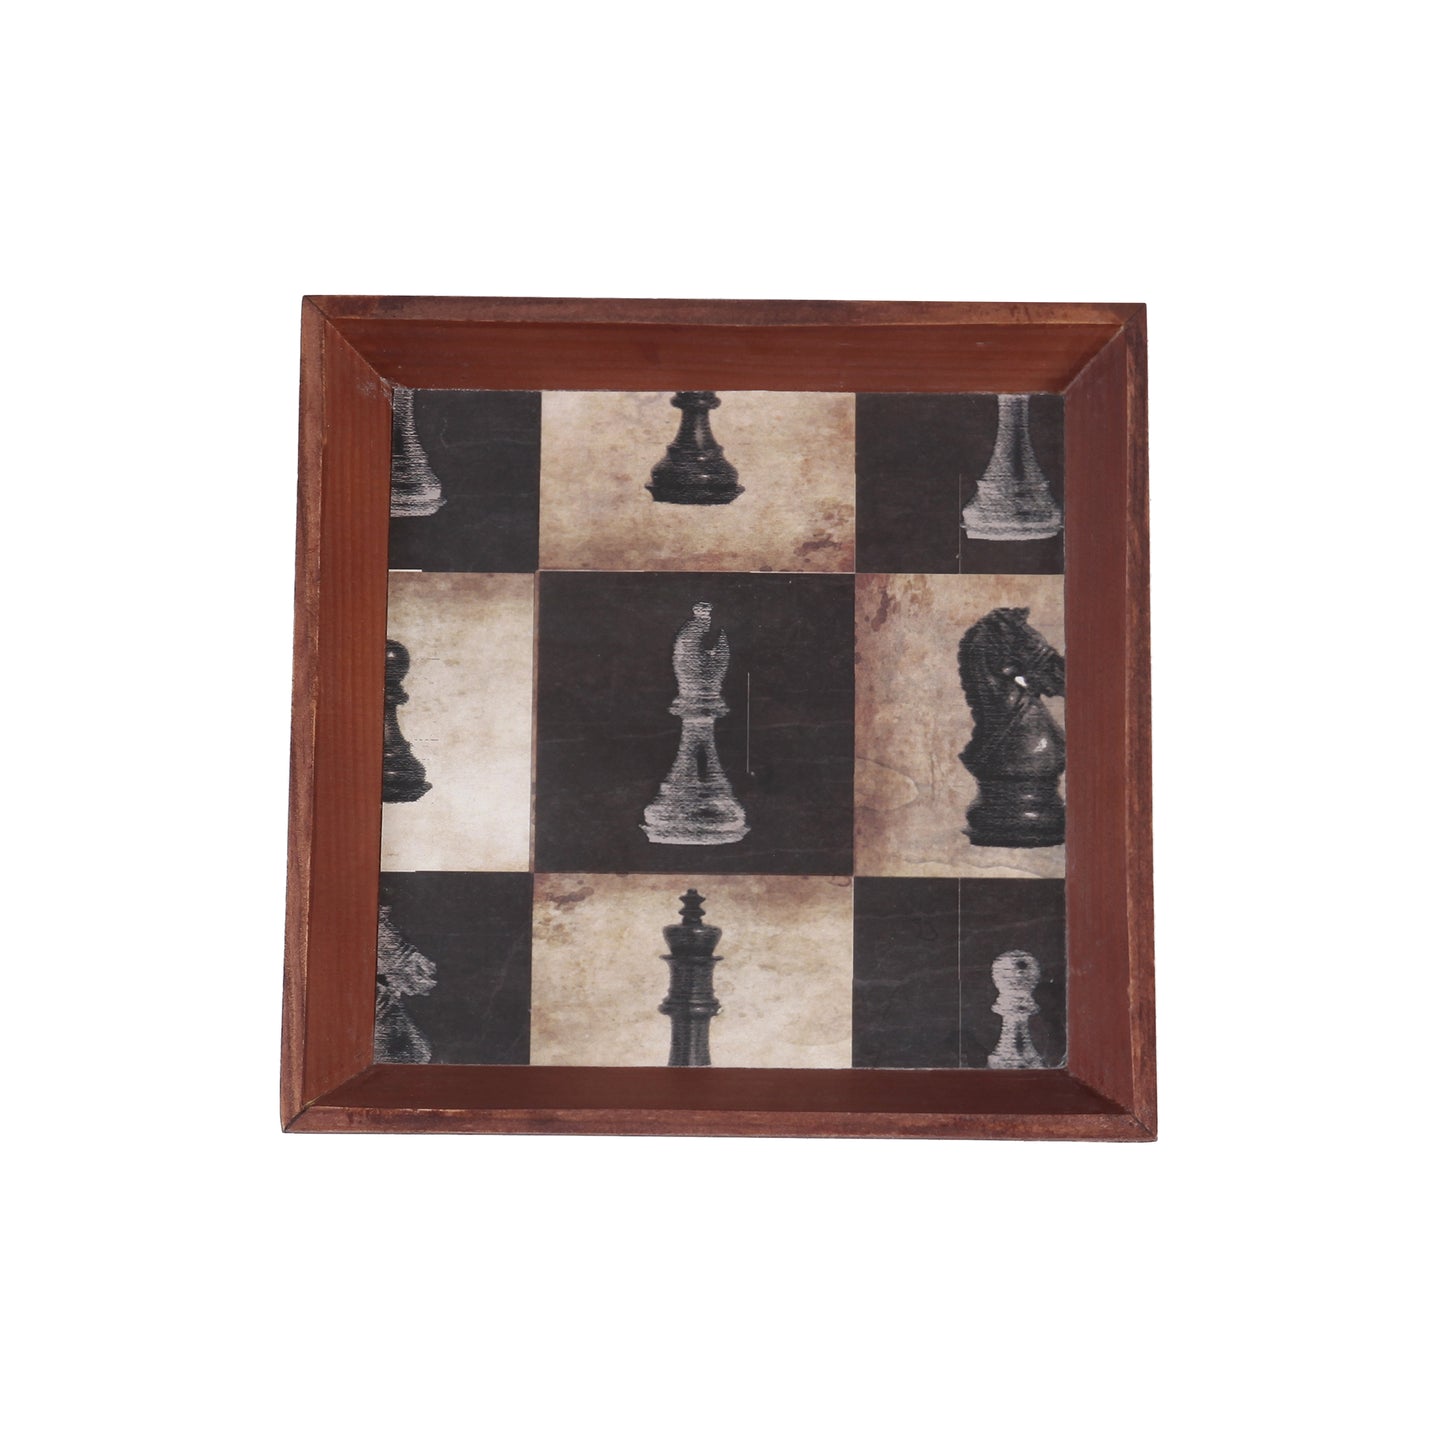 A Tiny Mistake Chess Small Square Wooden Serving Tray, 18 x 18 x 2 cm